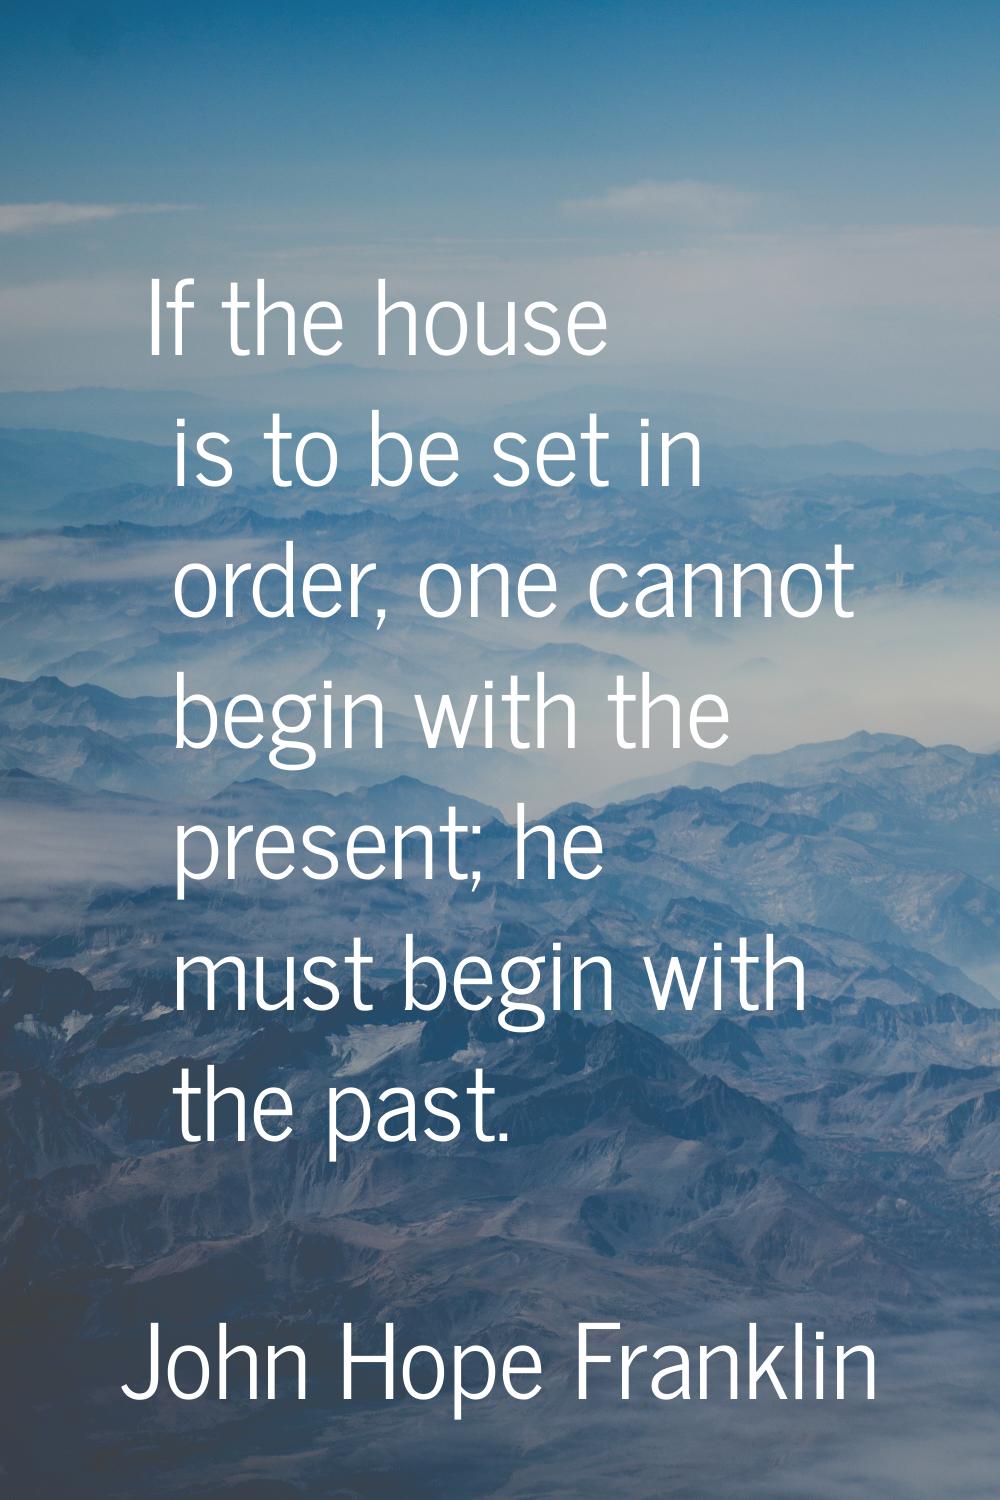 If the house is to be set in order, one cannot begin with the present; he must begin with the past.